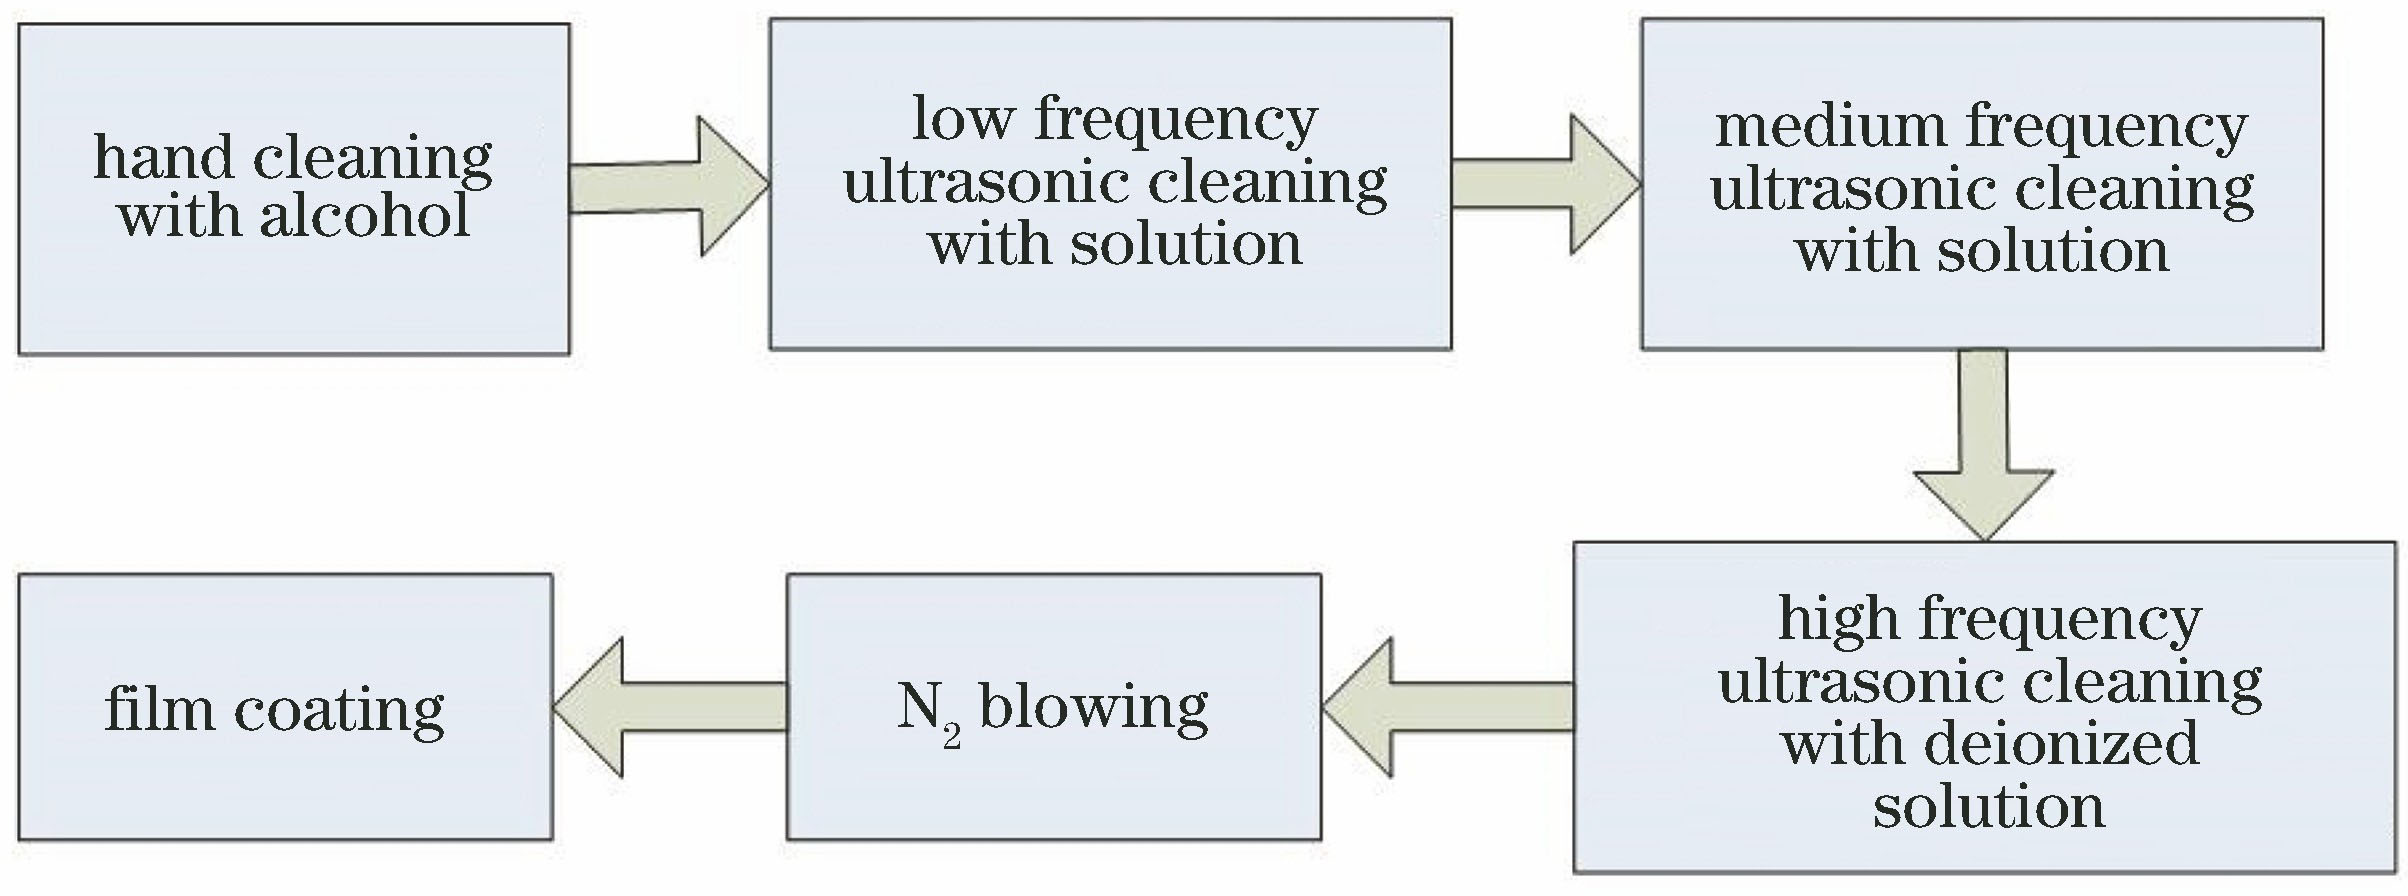 Process flow chart of ultrasonic cleaning